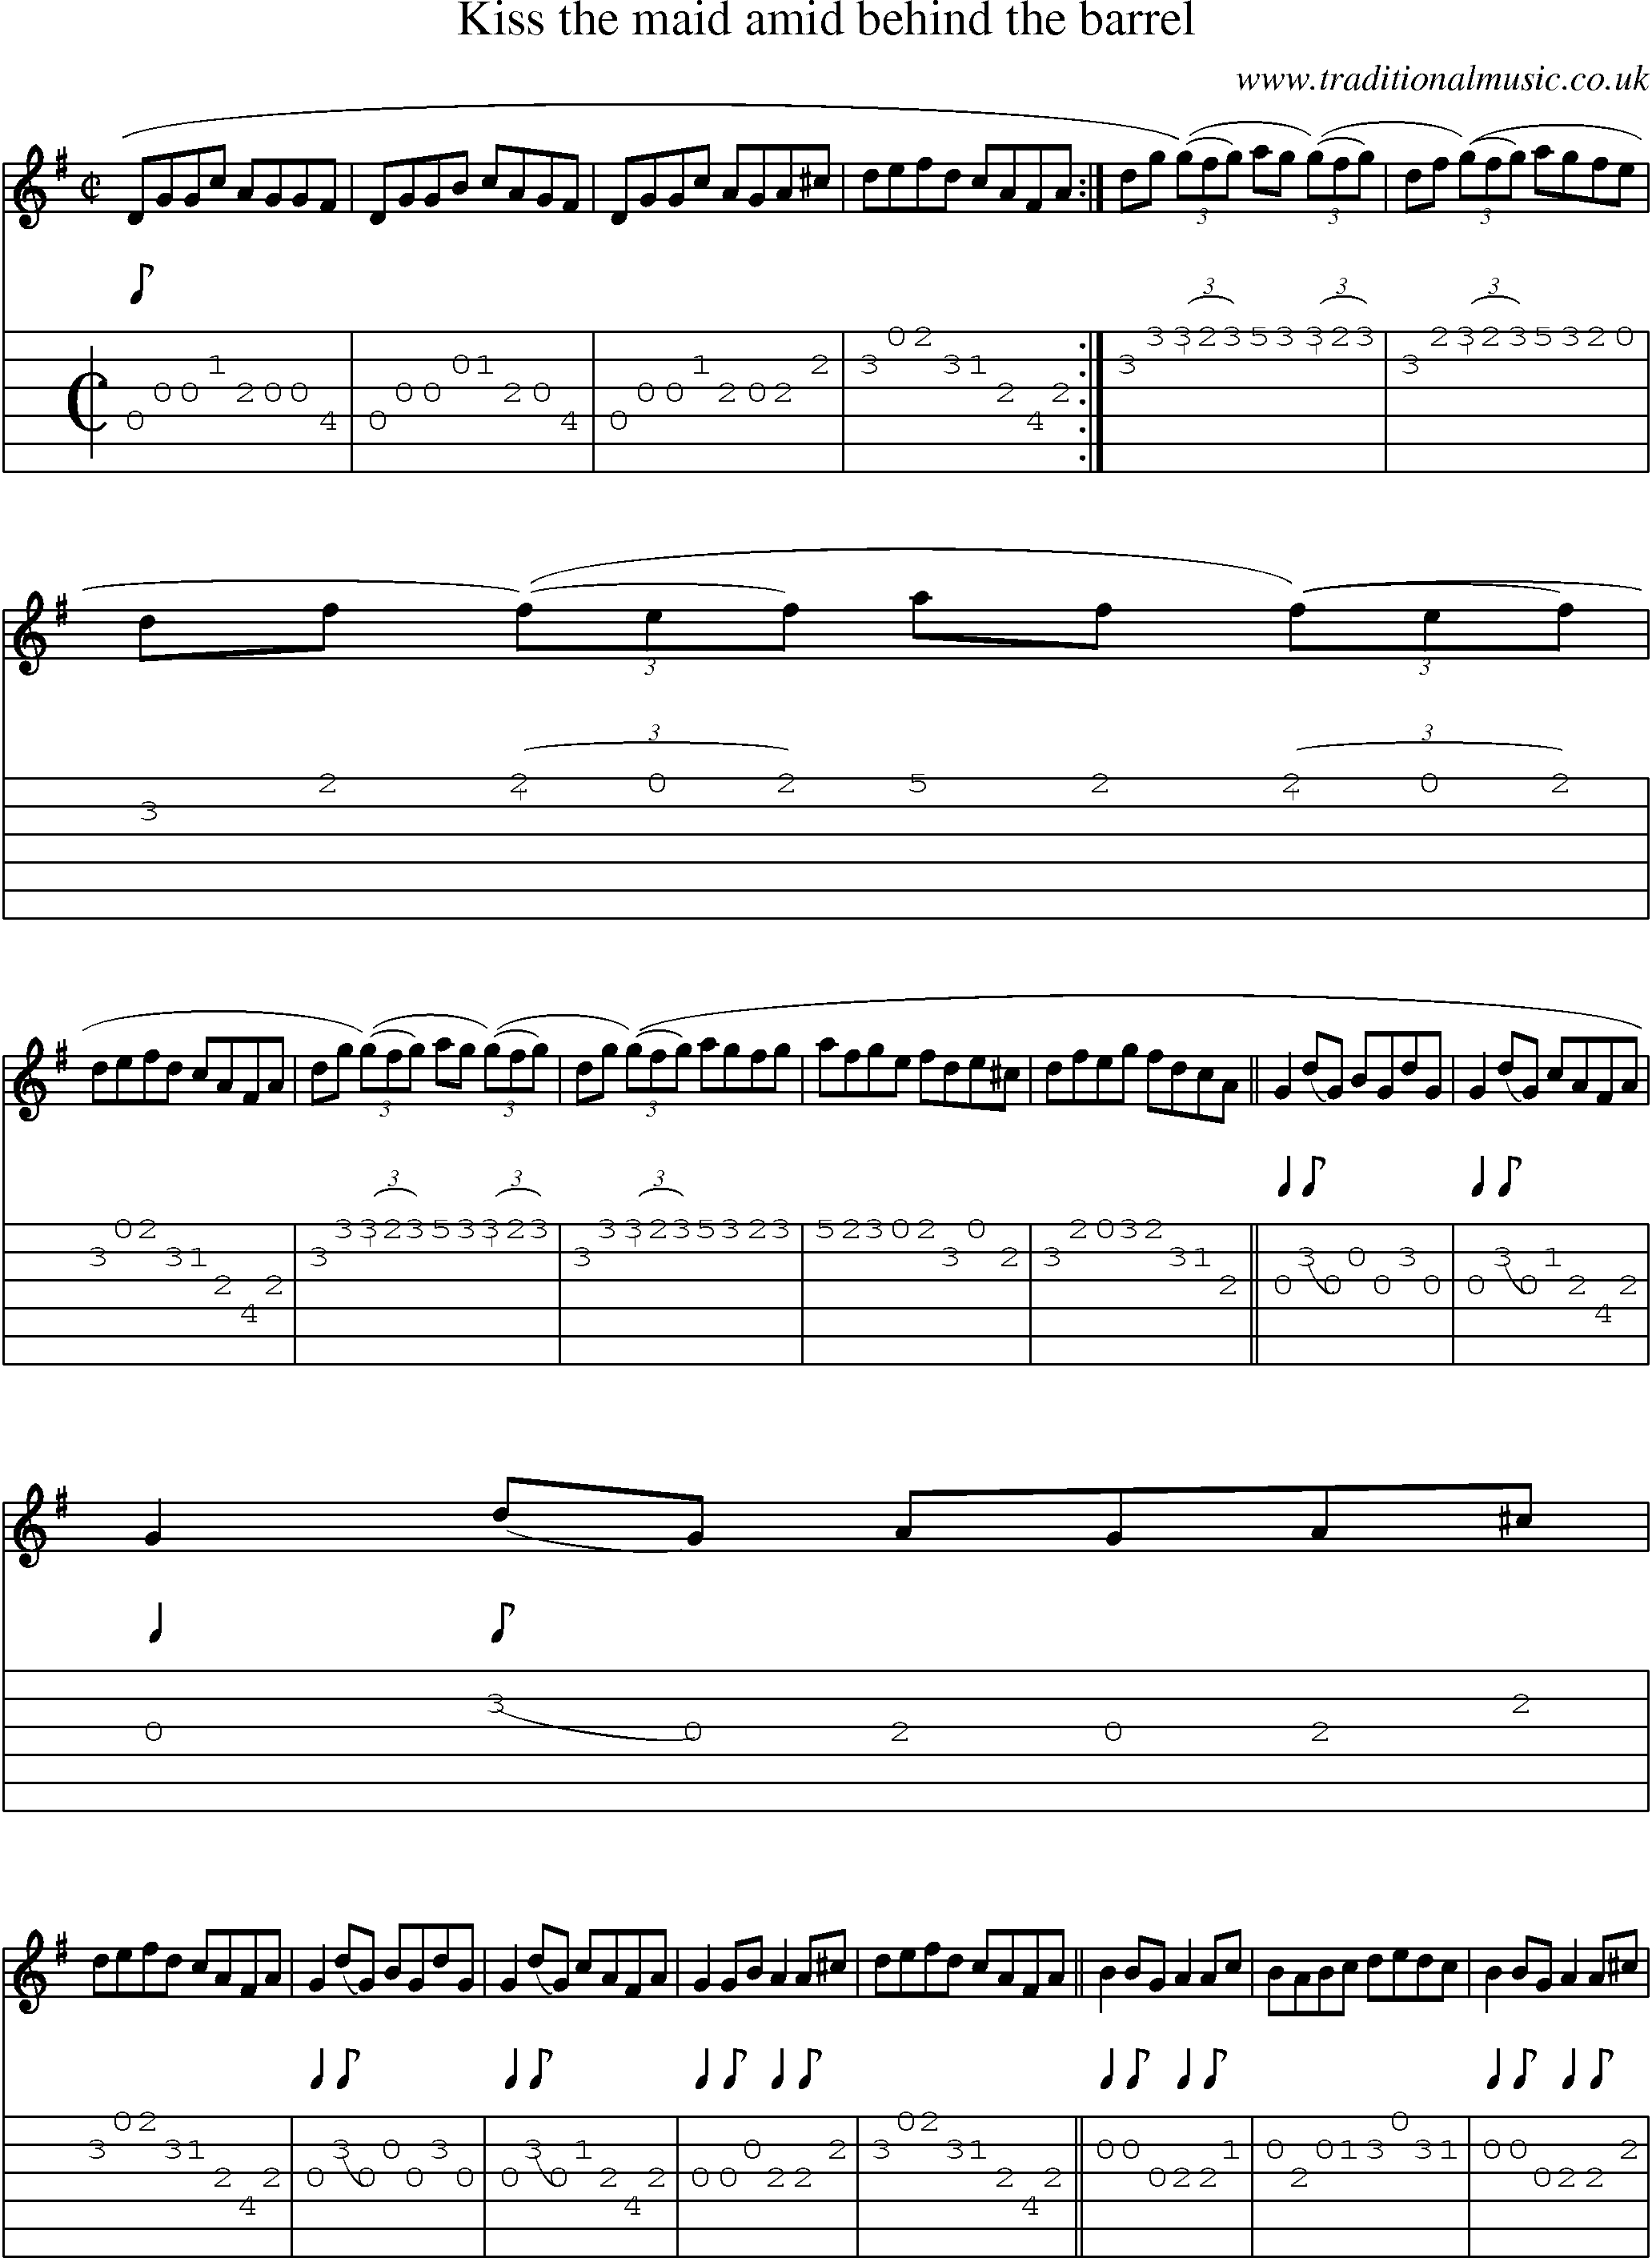 Music Score and Guitar Tabs for Kiss The Maid Amid Behind The Barrel